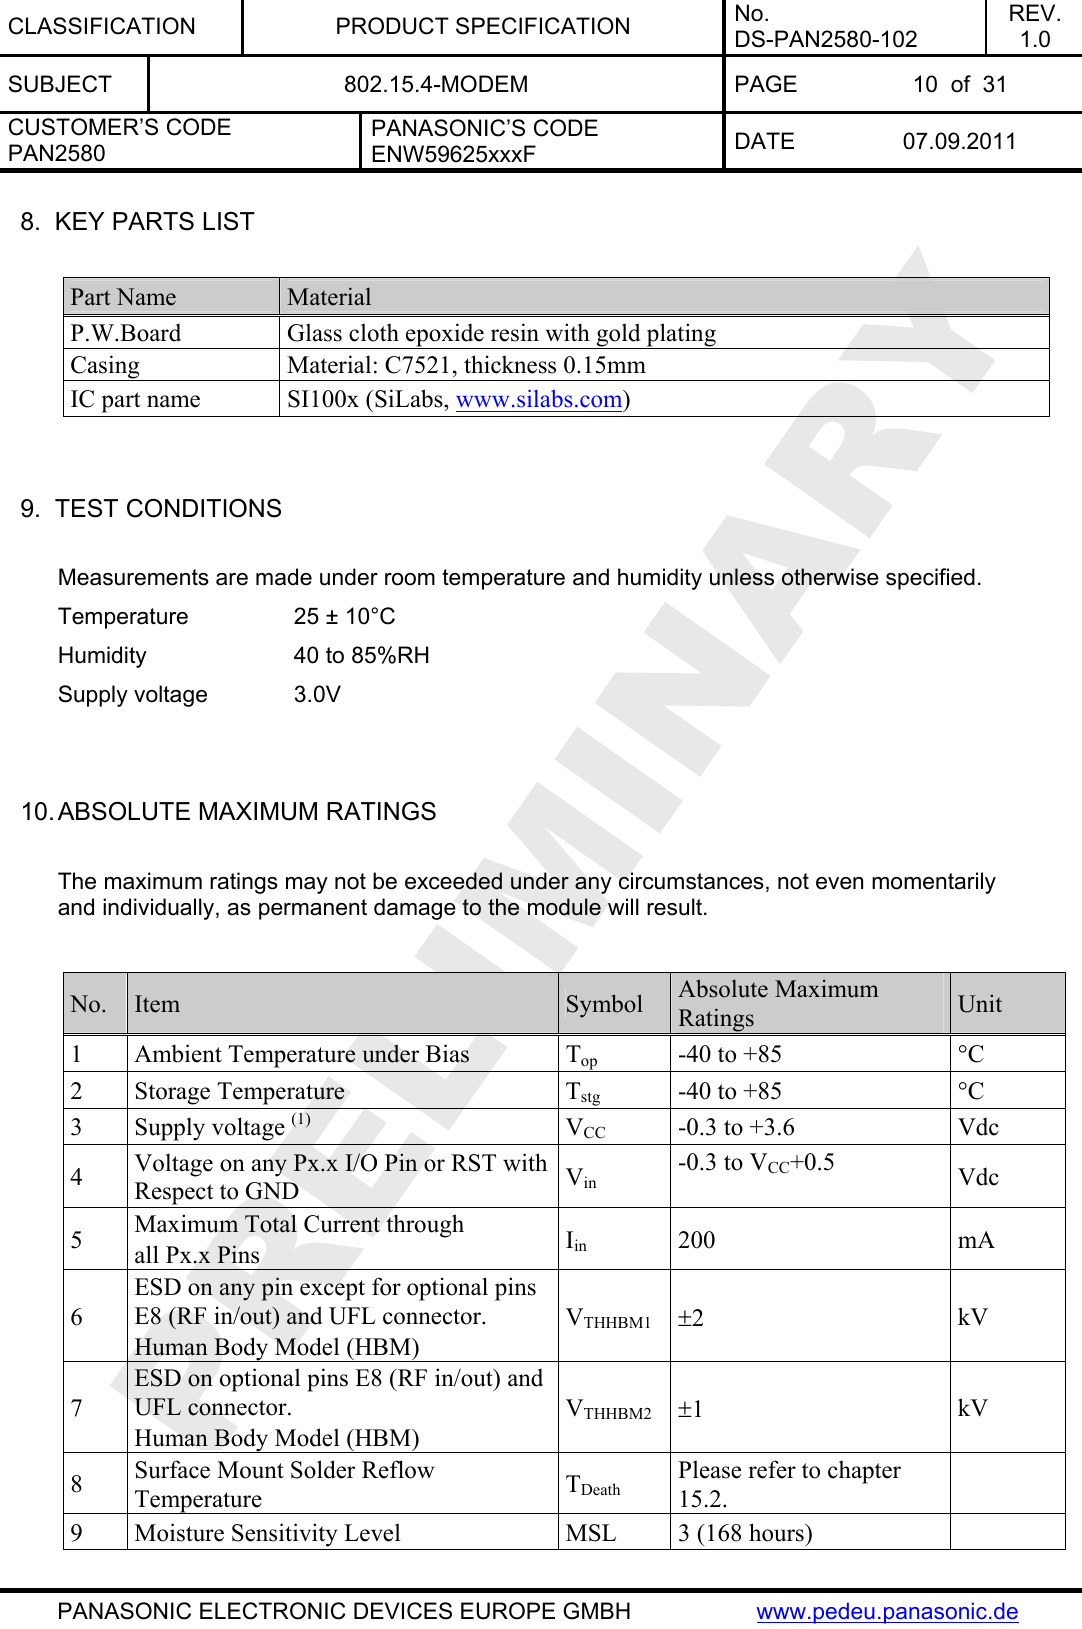 CLASSIFICATION PRODUCT SPECIFICATION No. DS-PAN2580-102 REV. 1.0 SUBJECT  802.15.4-MODEM  PAGE  10  of  31 CUSTOMER’S CODE PAN2580 PANASONIC’S CODE ENW59625xxxF  DATE 07.09.2011   PANASONIC ELECTRONIC DEVICES EUROPE GMBH  www.pedeu.panasonic.de  8.  KEY PARTS LIST  Part Name  Material P.W.Board Glass cloth epoxide resin with gold plating Casing  Material: C7521, thickness 0.15mm IC part name  SI100x (SiLabs, www.silabs.com)   9.  TEST CONDITIONS  Measurements are made under room temperature and humidity unless otherwise specified. Temperature    25 ± 10°C   Humidity    40 to 85%RH Supply voltage    3.0V   10. ABSOLUTE MAXIMUM RATINGS  The maximum ratings may not be exceeded under any circumstances, not even momentarily and individually, as permanent damage to the module will result.  No.  Item  Symbol  Absolute Maximum Ratings  Unit 1  Ambient Temperature under Bias  Top  -40 to +85  °C 2 Storage Temperature  Tstg  -40 to +85  °C 3 Supply voltage (1) VCC  -0.3 to +3.6  Vdc 4  Voltage on any Px.x I/O Pin or RST with Respect to GND  Vin -0.3 to VCC+0.5  Vdc 5  Maximum Total Current through all Px.x Pins  Iin 200  mA 6 ESD on any pin except for optional pins E8 (RF in/out) and UFL connector. Human Body Model (HBM) VTHHBM1 ±2  kV 7 ESD on optional pins E8 (RF in/out) and UFL connector. Human Body Model (HBM) VTHHBM2 ±1  kV 8  Surface Mount Solder Reflow Temperature  TDeath Please refer to chapter 15.2.   9  Moisture Sensitivity Level  MSL  3 (168 hours)   